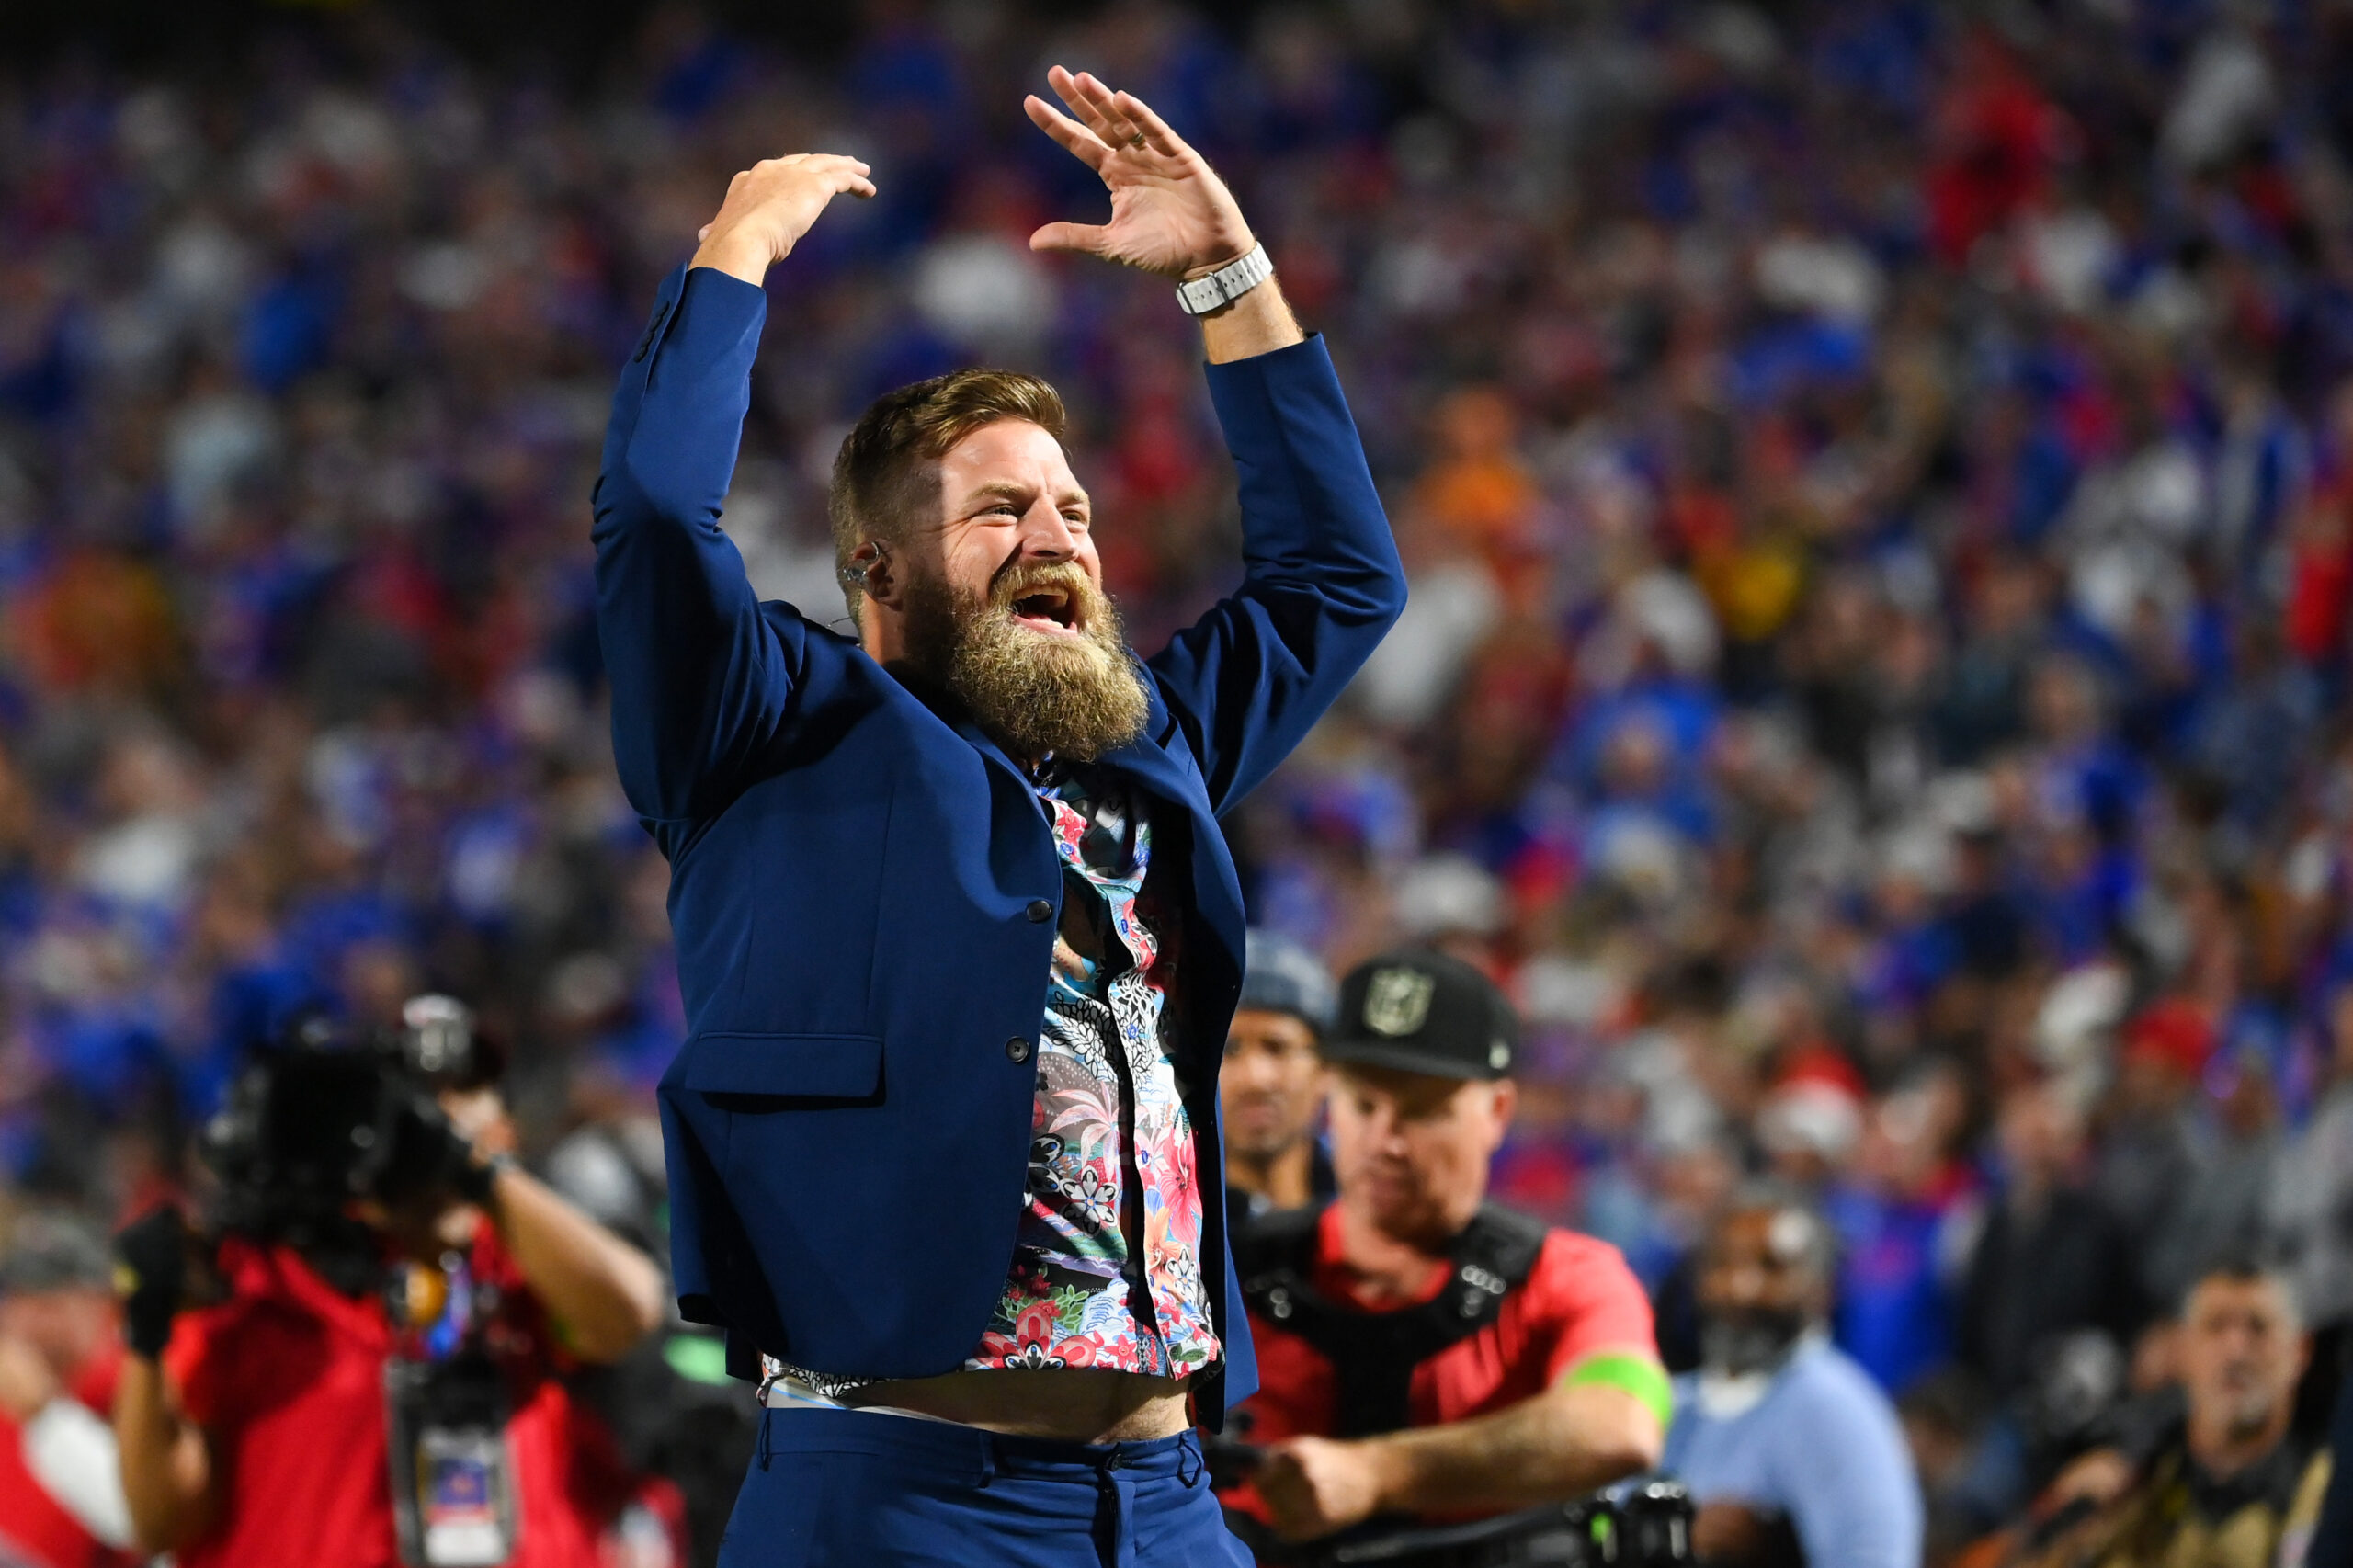 Man of his word: Ryan Fitzpatrick goes shirtless after Bills win